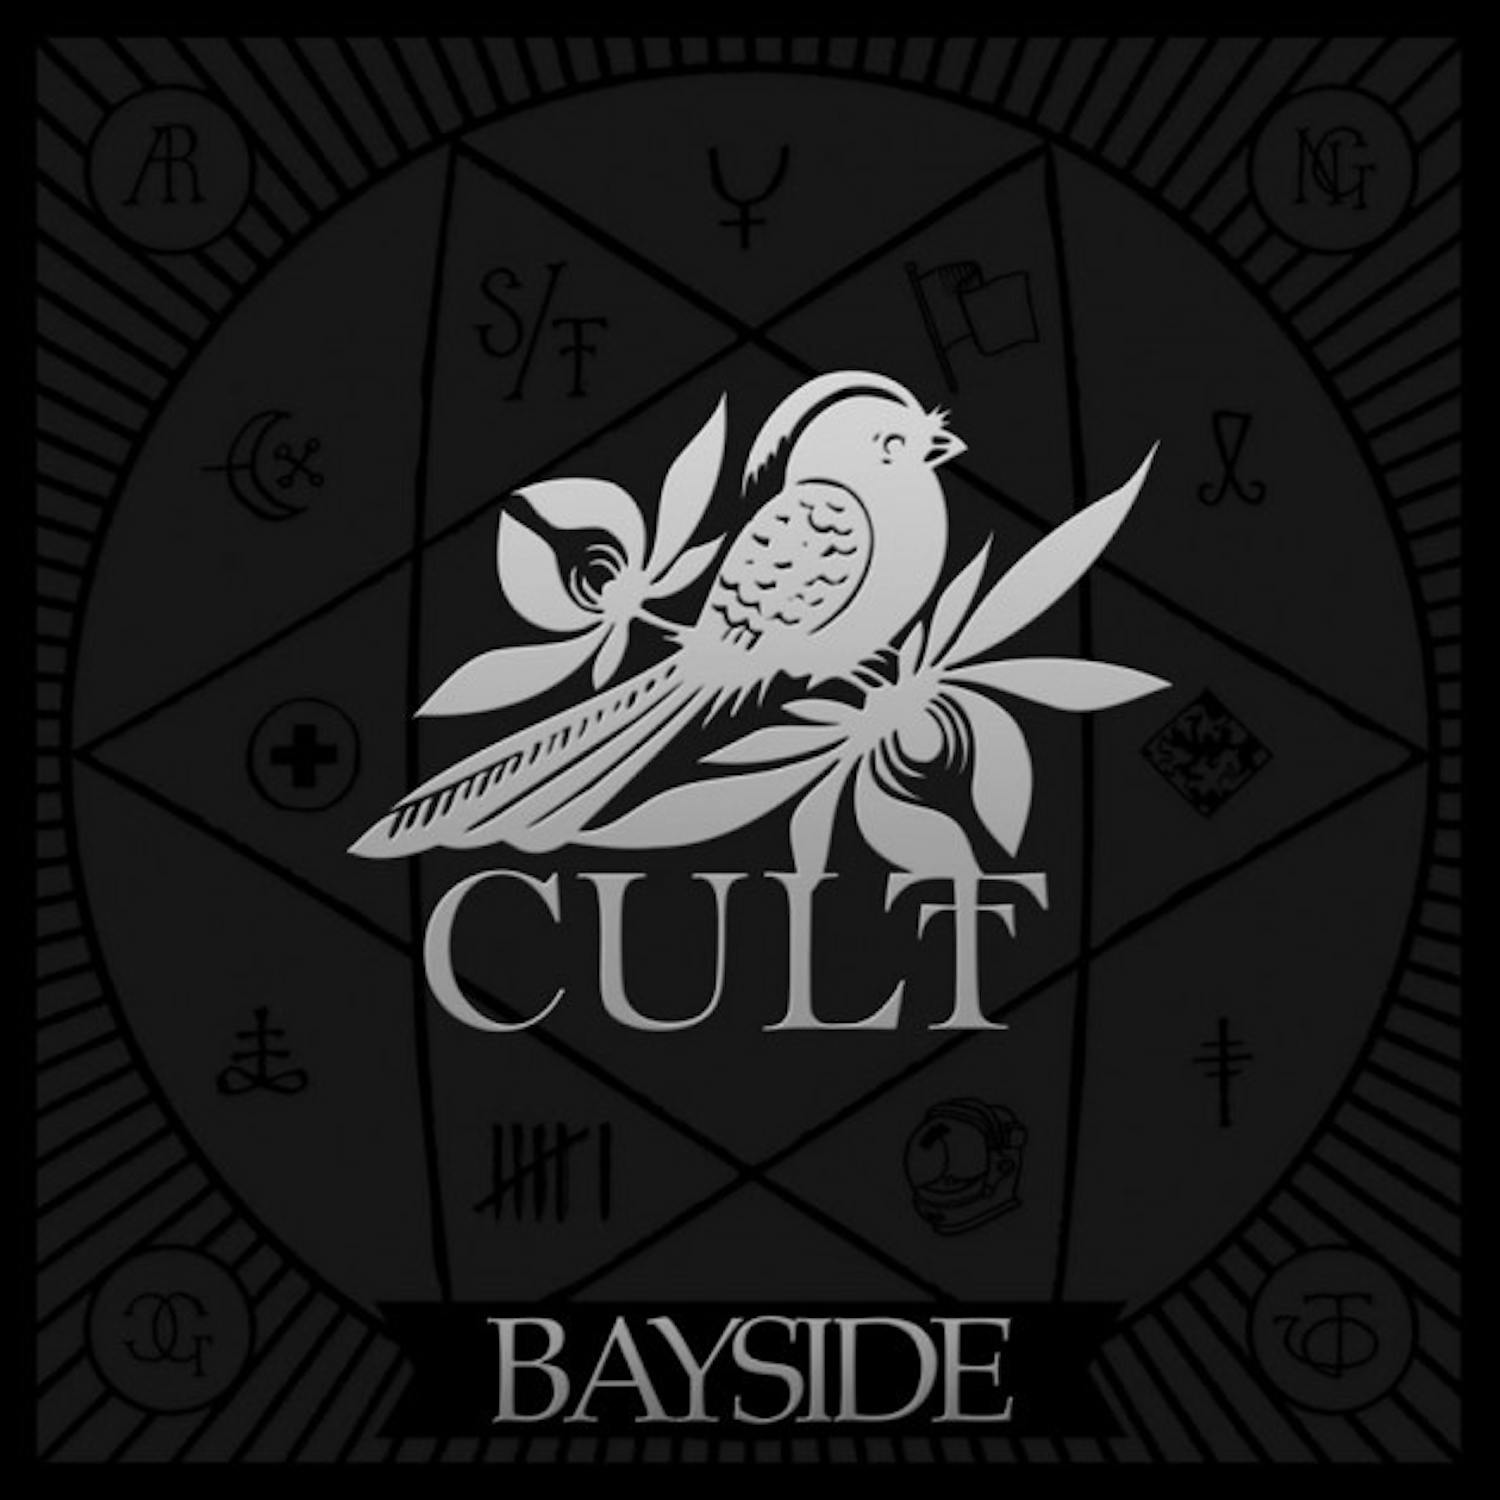 Bayside&rsquo;s newest album, &ldquo;Cult,&rdquo; is a return to the band&rsquo;s older style.
&nbsp;The band is performing at The Waiting Room on Oct. 8.&nbsp;
Courtesy of Hopeless Records